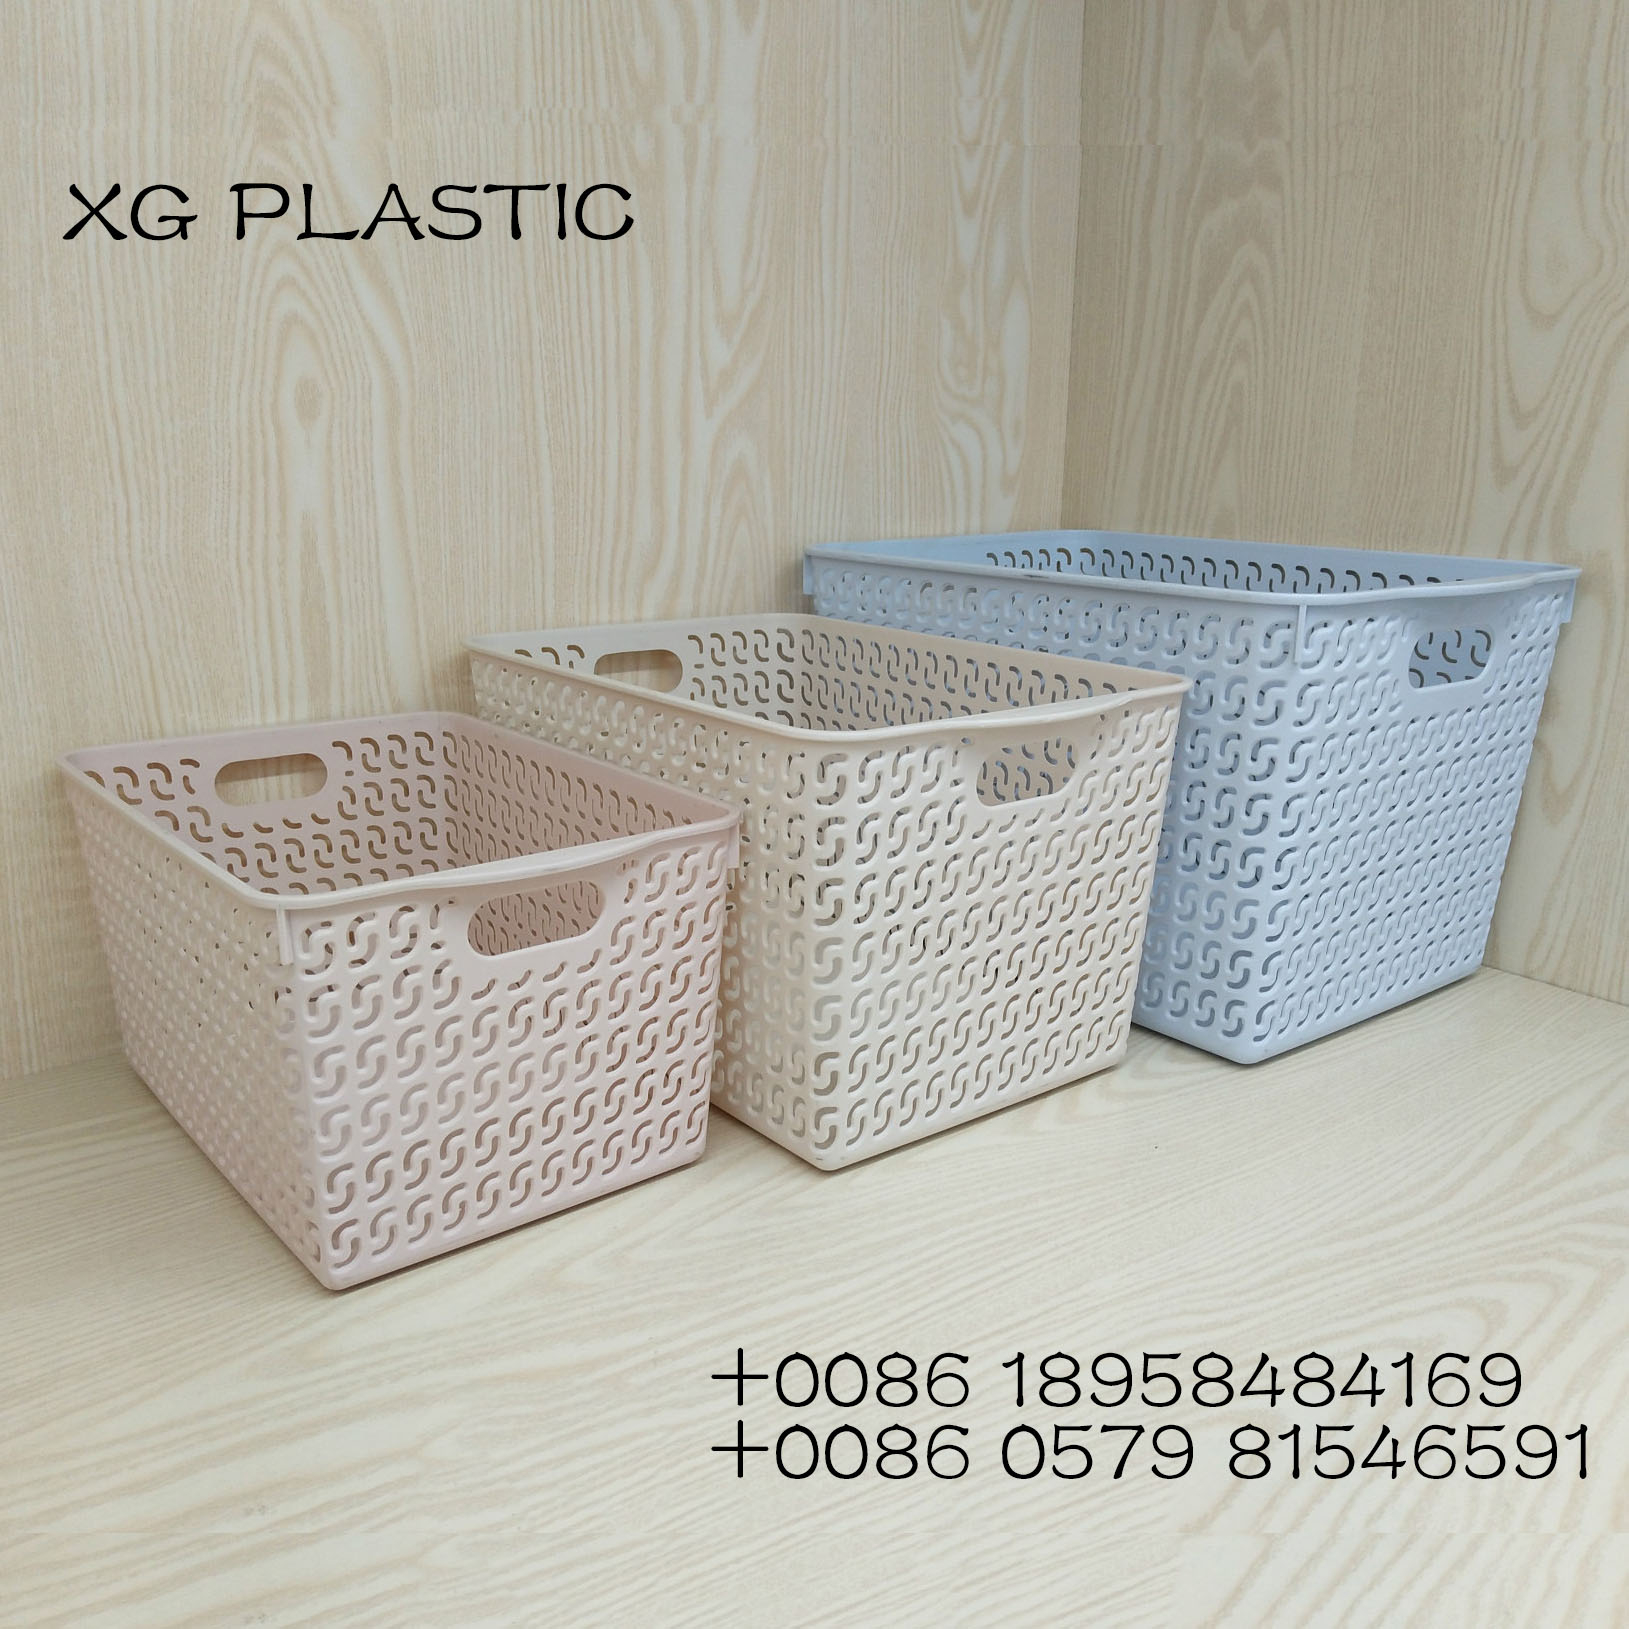 Supply Plastic Storage Baskets Bins Organizer With Handles intended for dimensions 1629 X 1629